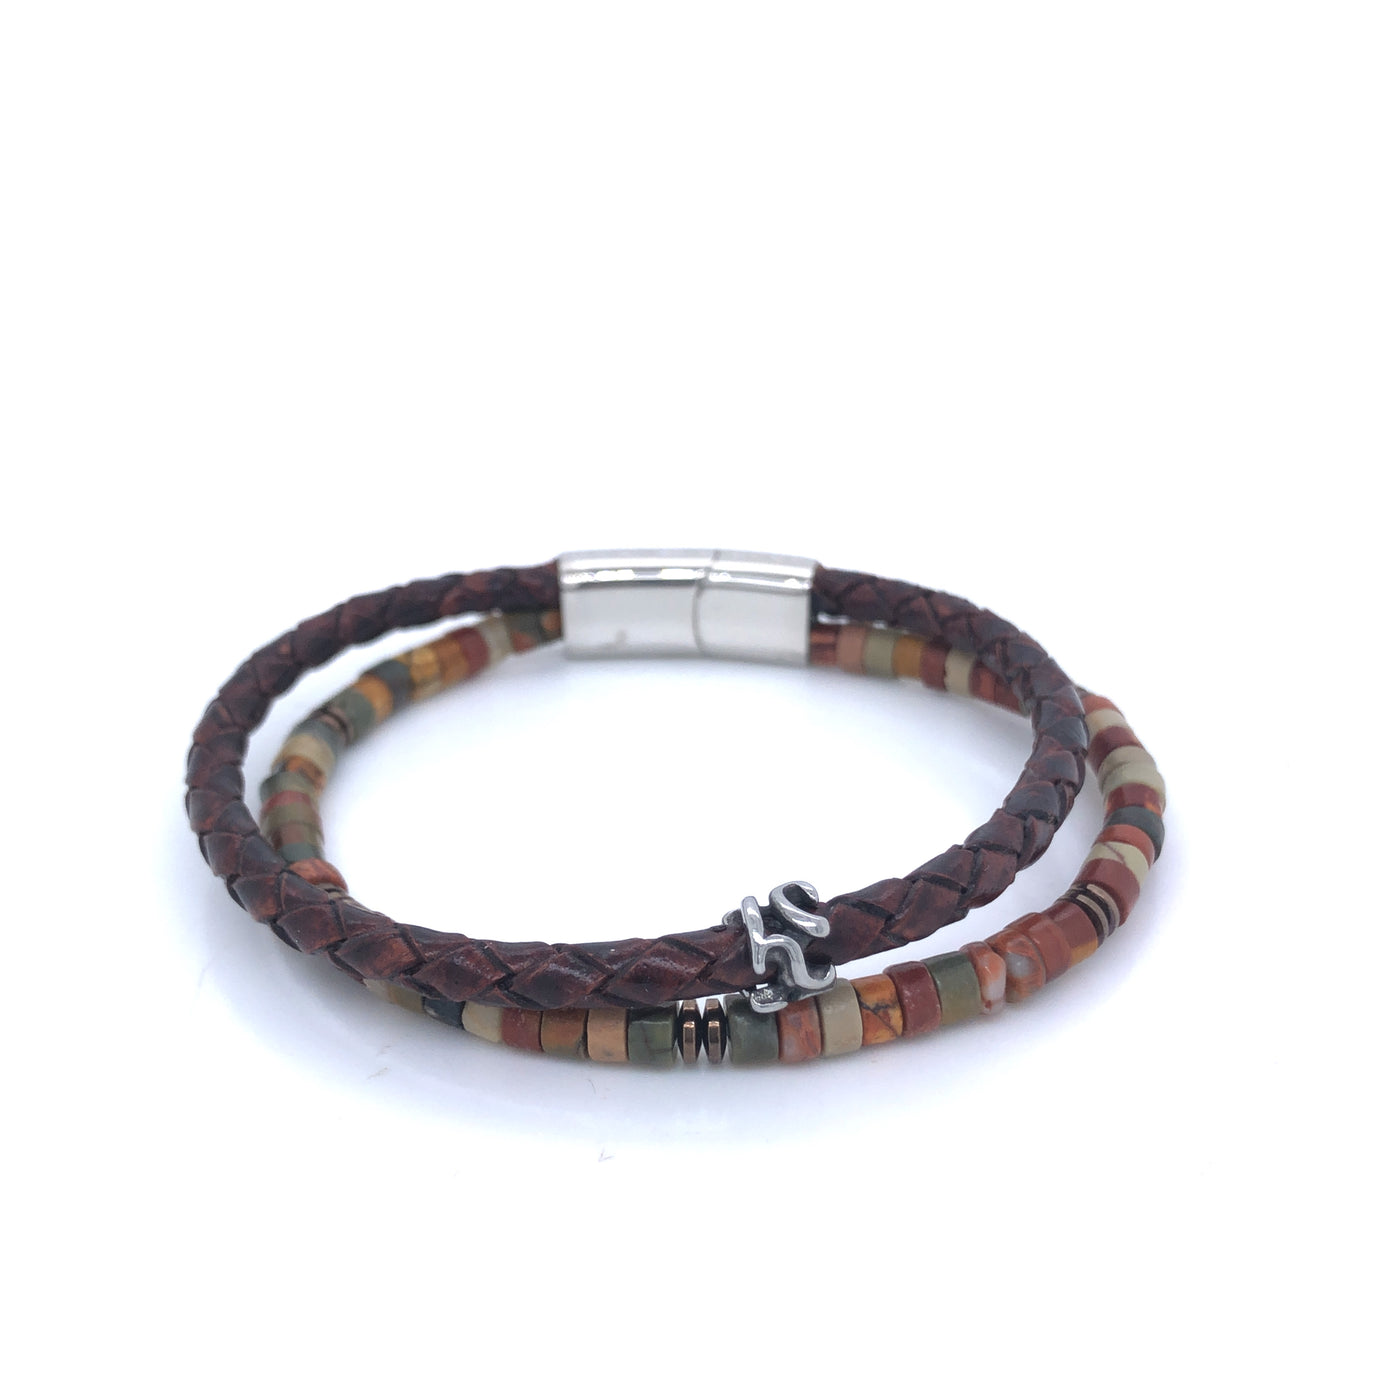 Double Strand Brown Leather Braided Bracelet Featuring Earthy Toned Agate Beads